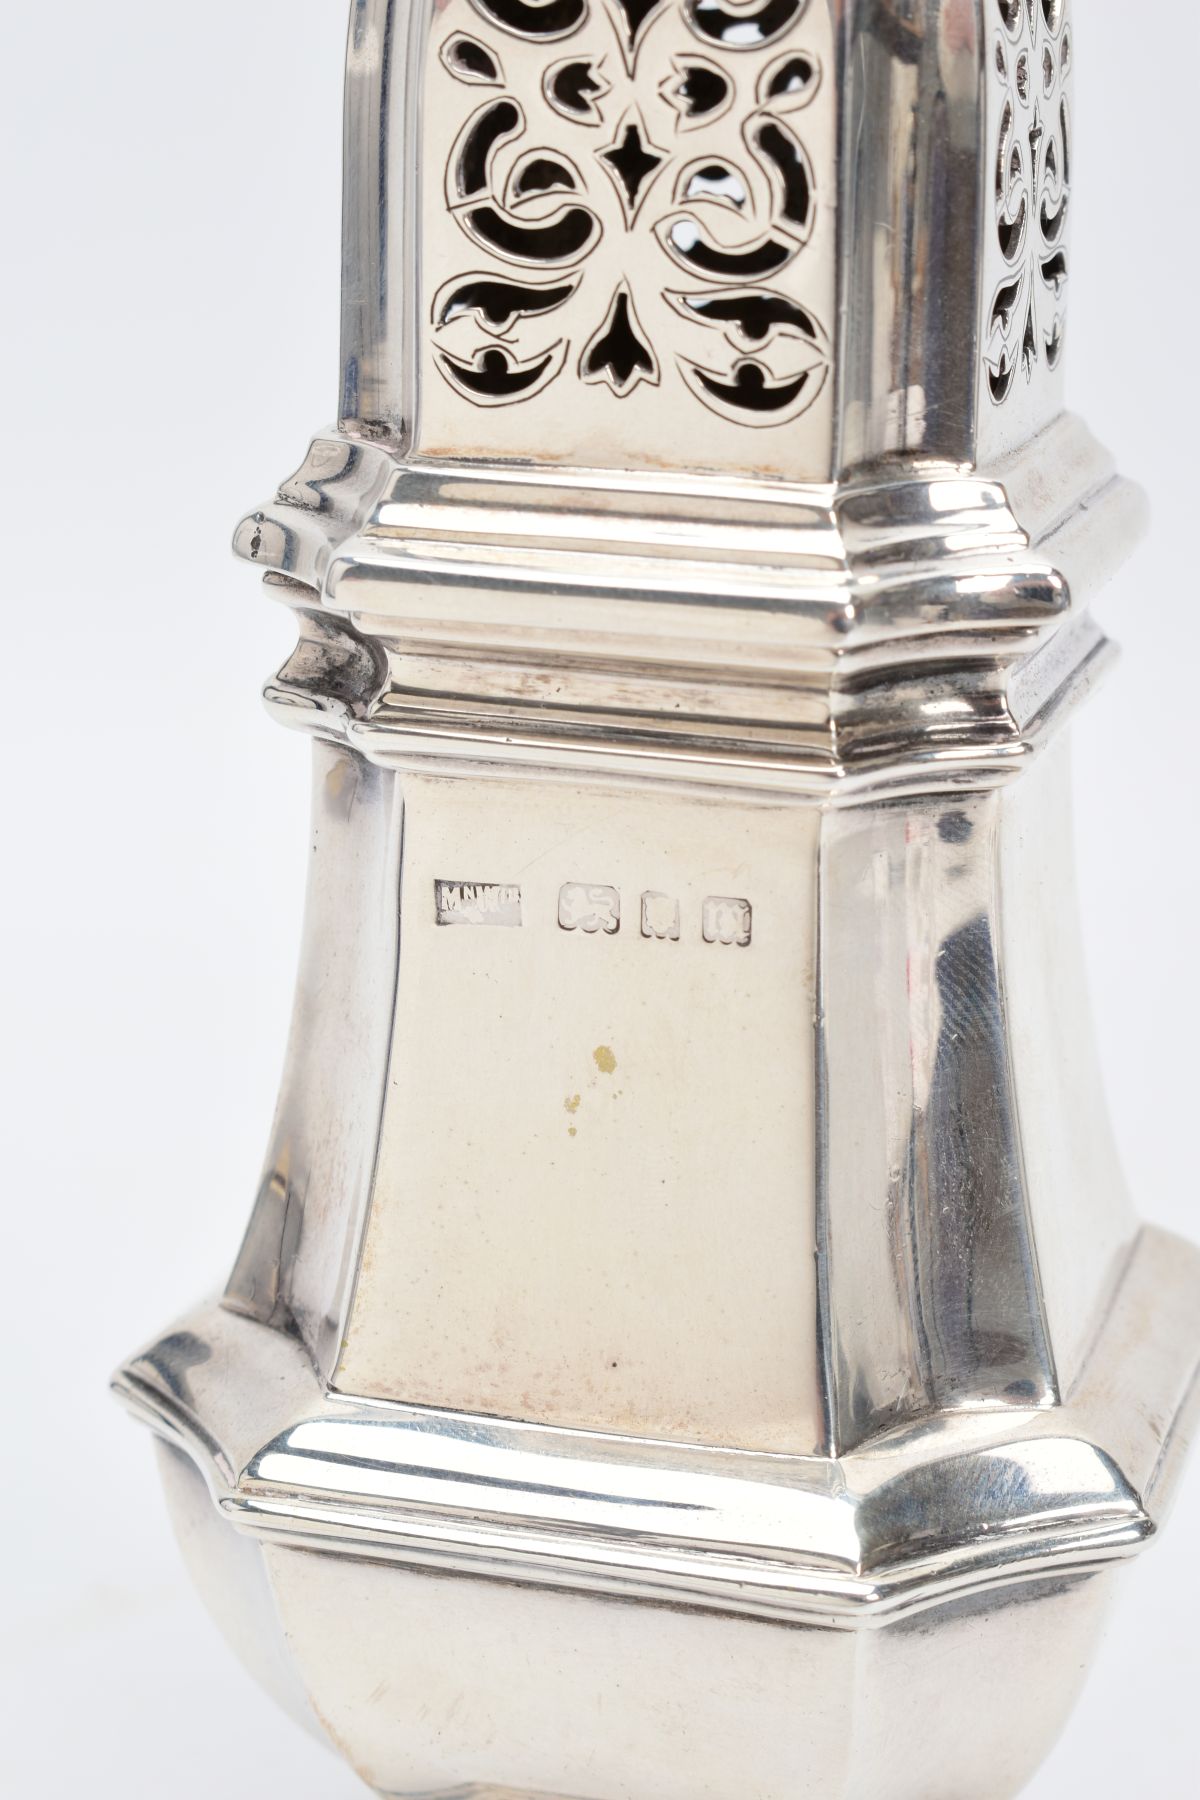 A SILVER GEORGIAN SUGAR SIFTER, plain polished design with an openwork cover, hallmarked London 1927 - Image 3 of 7